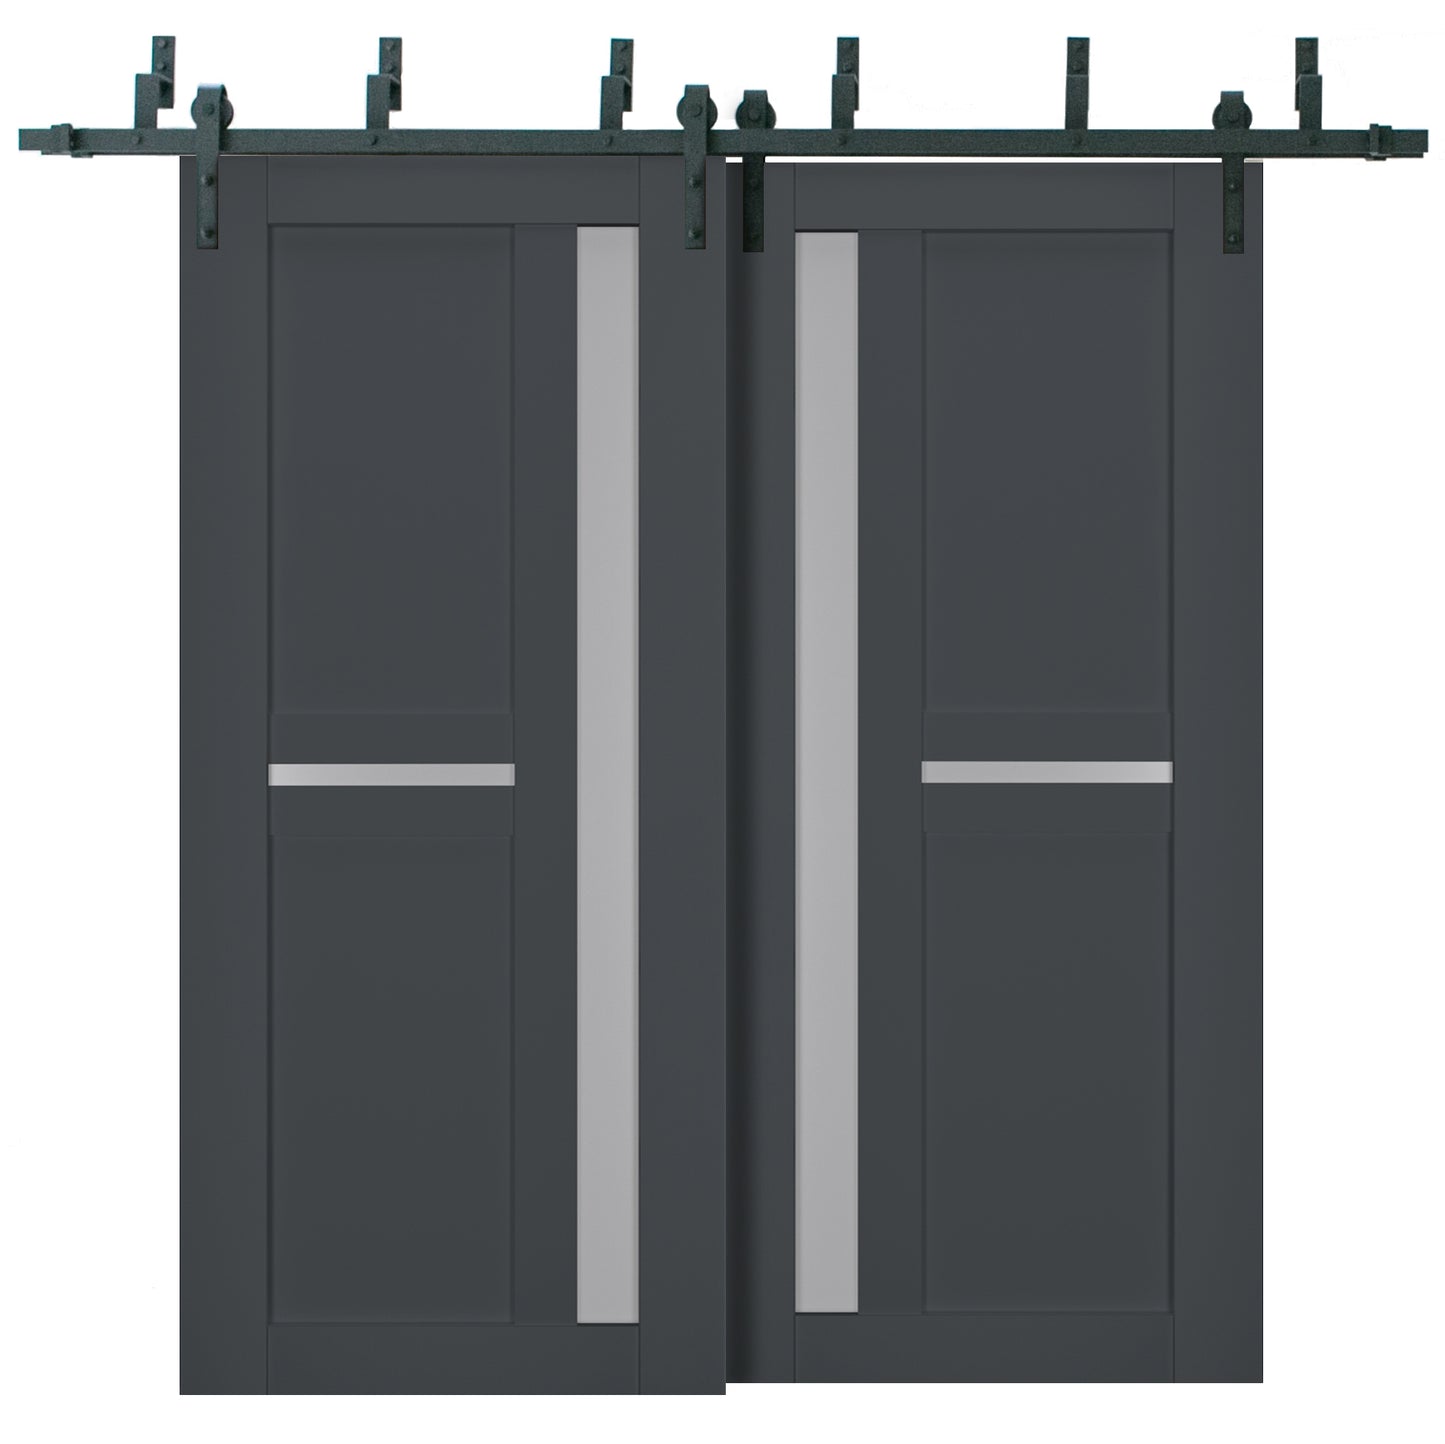 Veregio 7288 Antracite Double Barn Door with Frosted Glass and Black Bypass Rail